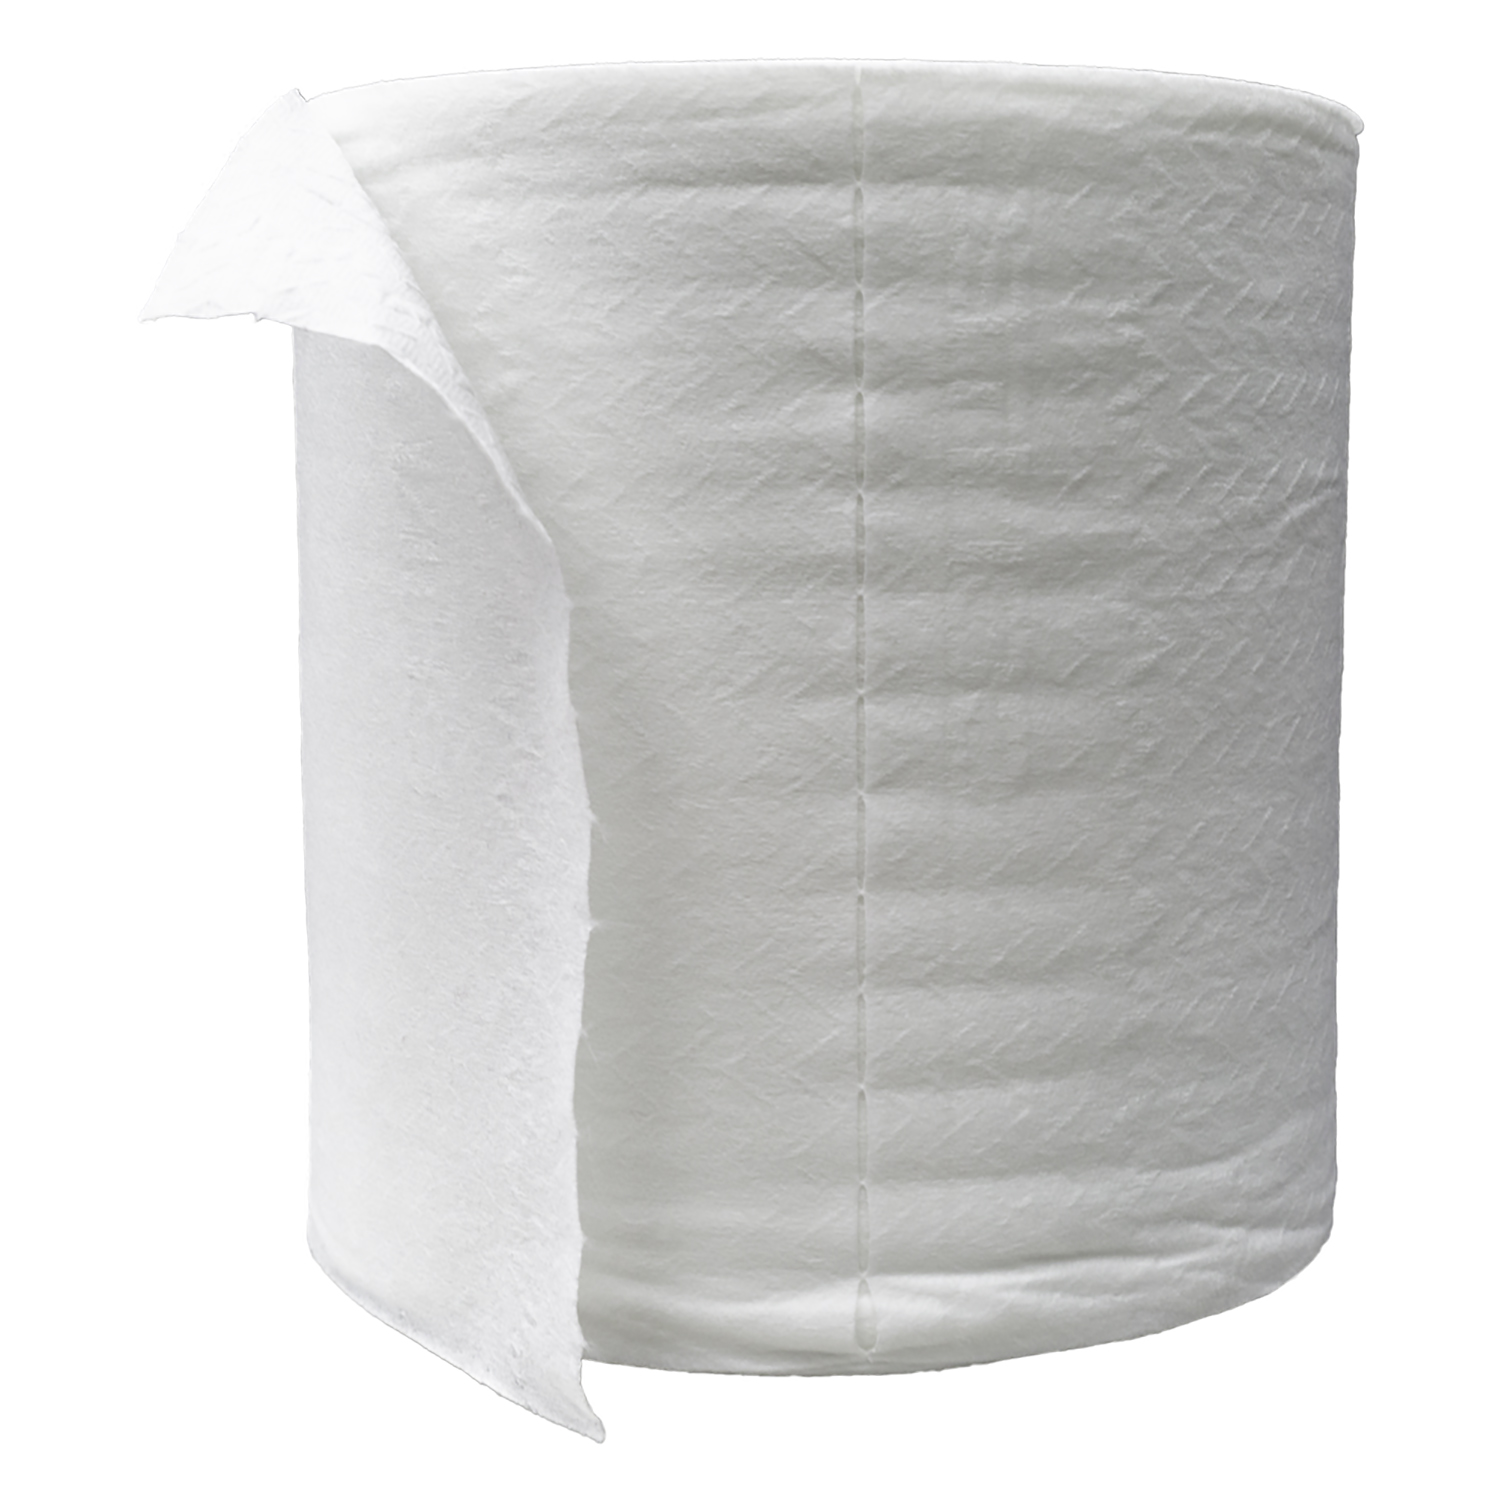 ContecClean™ Cloth Roll With Lidded Canister - Perforated, 9" x 12", 4/Case